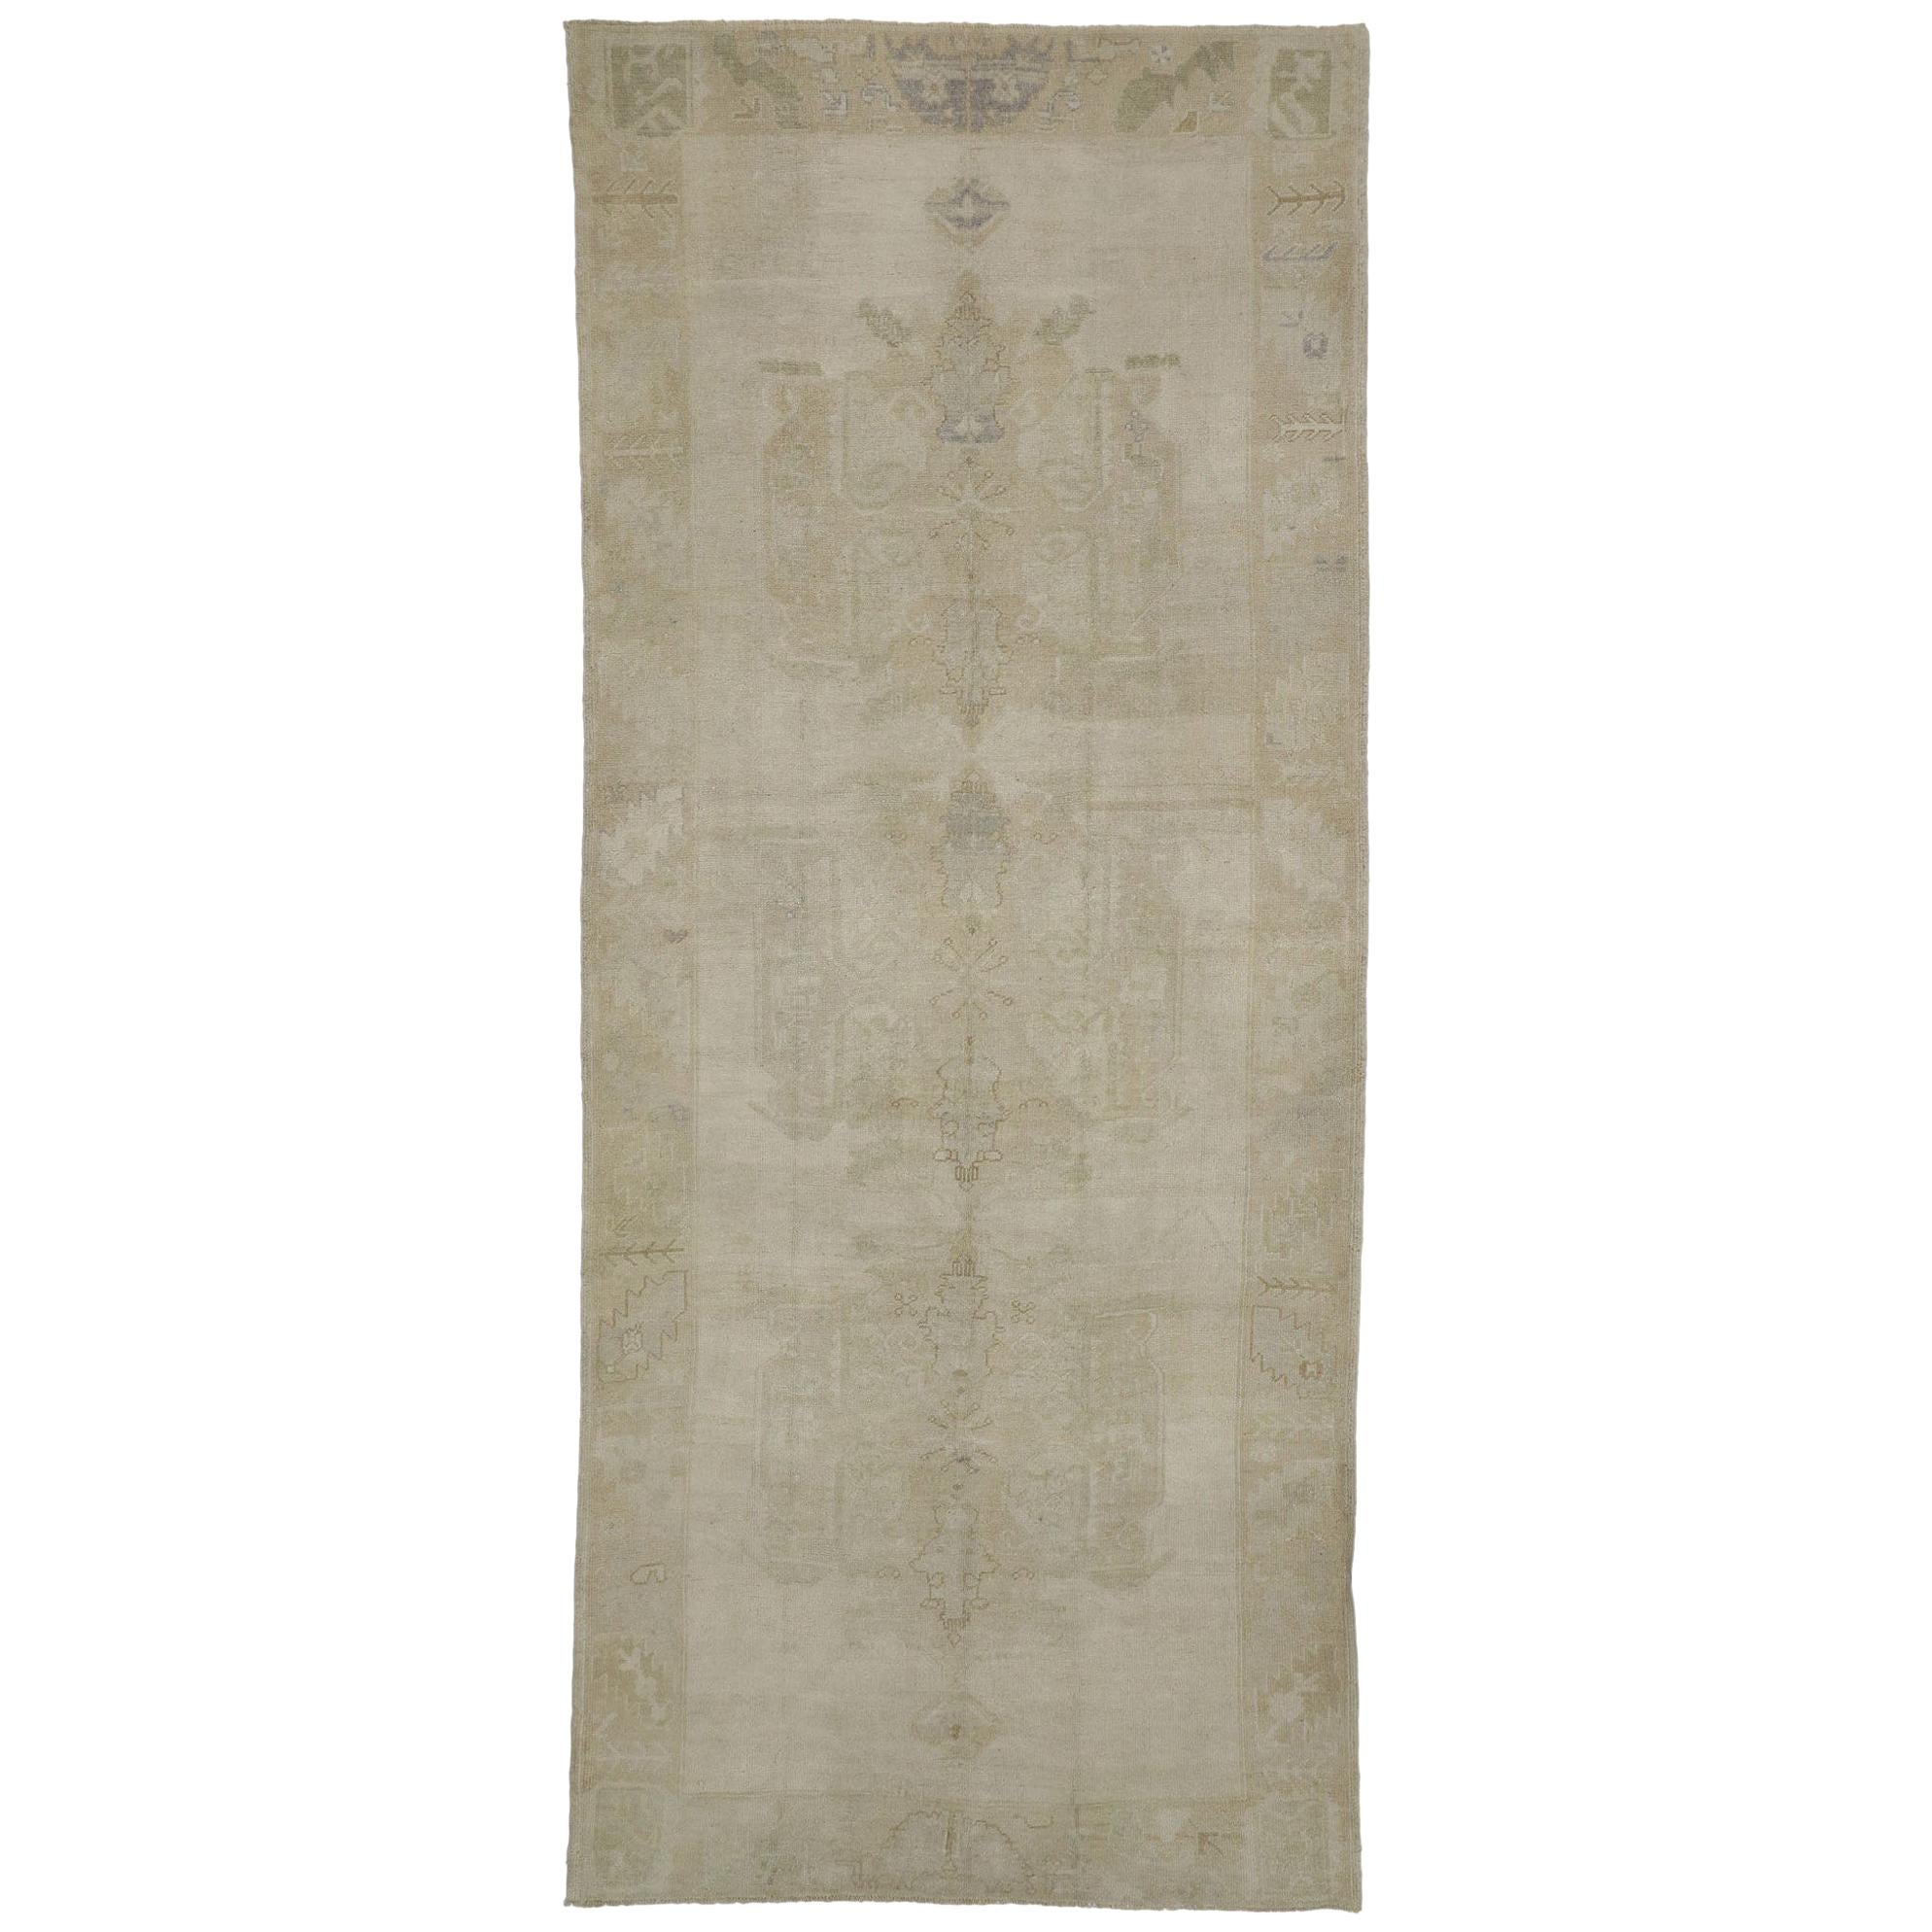 Vintage Turkish Oushak Gallery Rug with Rustic Style and Neutral Colors